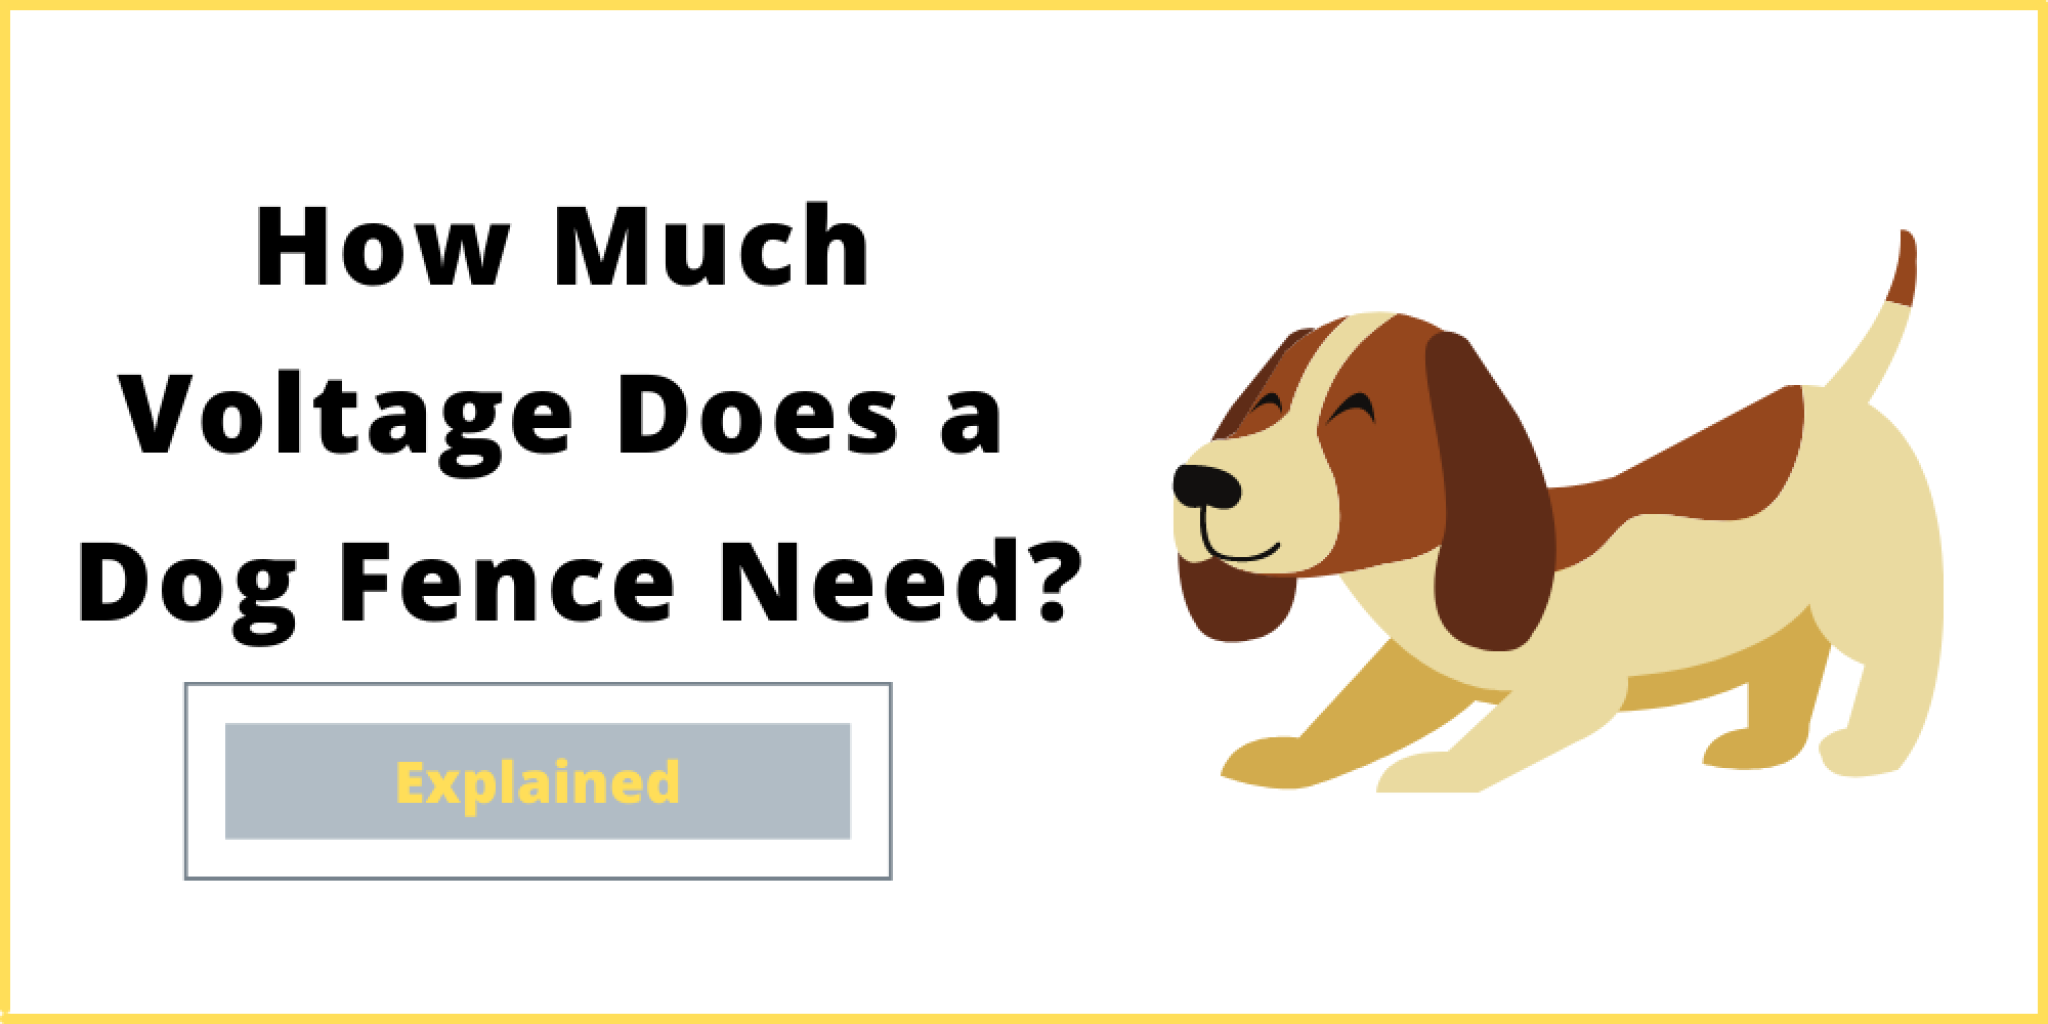 How Much Voltage Does a Dog Fence Need? - Must Read